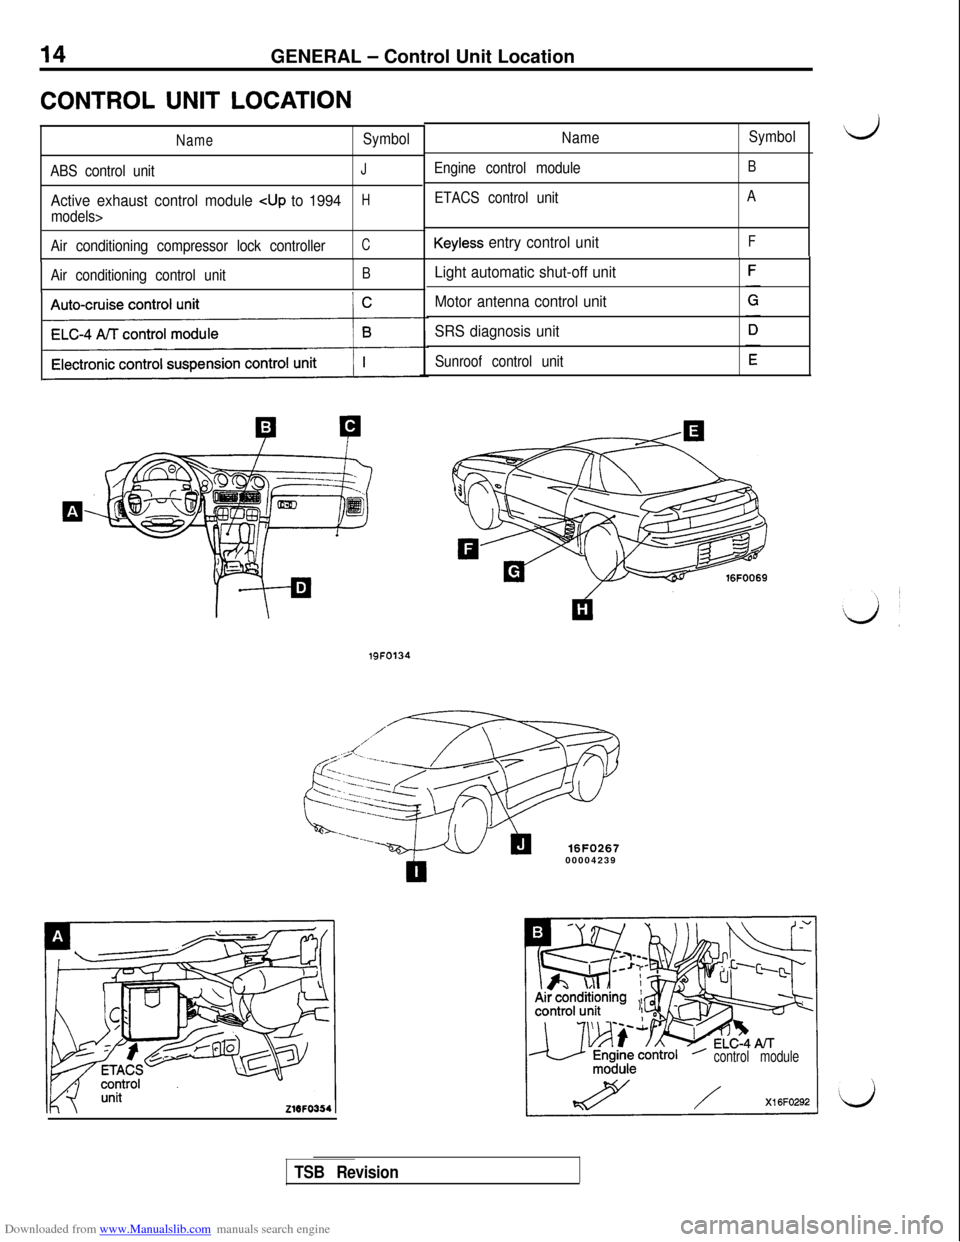 MITSUBISHI 3000GT 1992 2.G User Guide Downloaded from www.Manualslib.com manuals search engine 14GENERAL - Control Unit Location
CONTROL UNIT LOCATION
NameSymbol
ABS control unit
J
Active exhaust control module cup to 1994H
models>
Air co